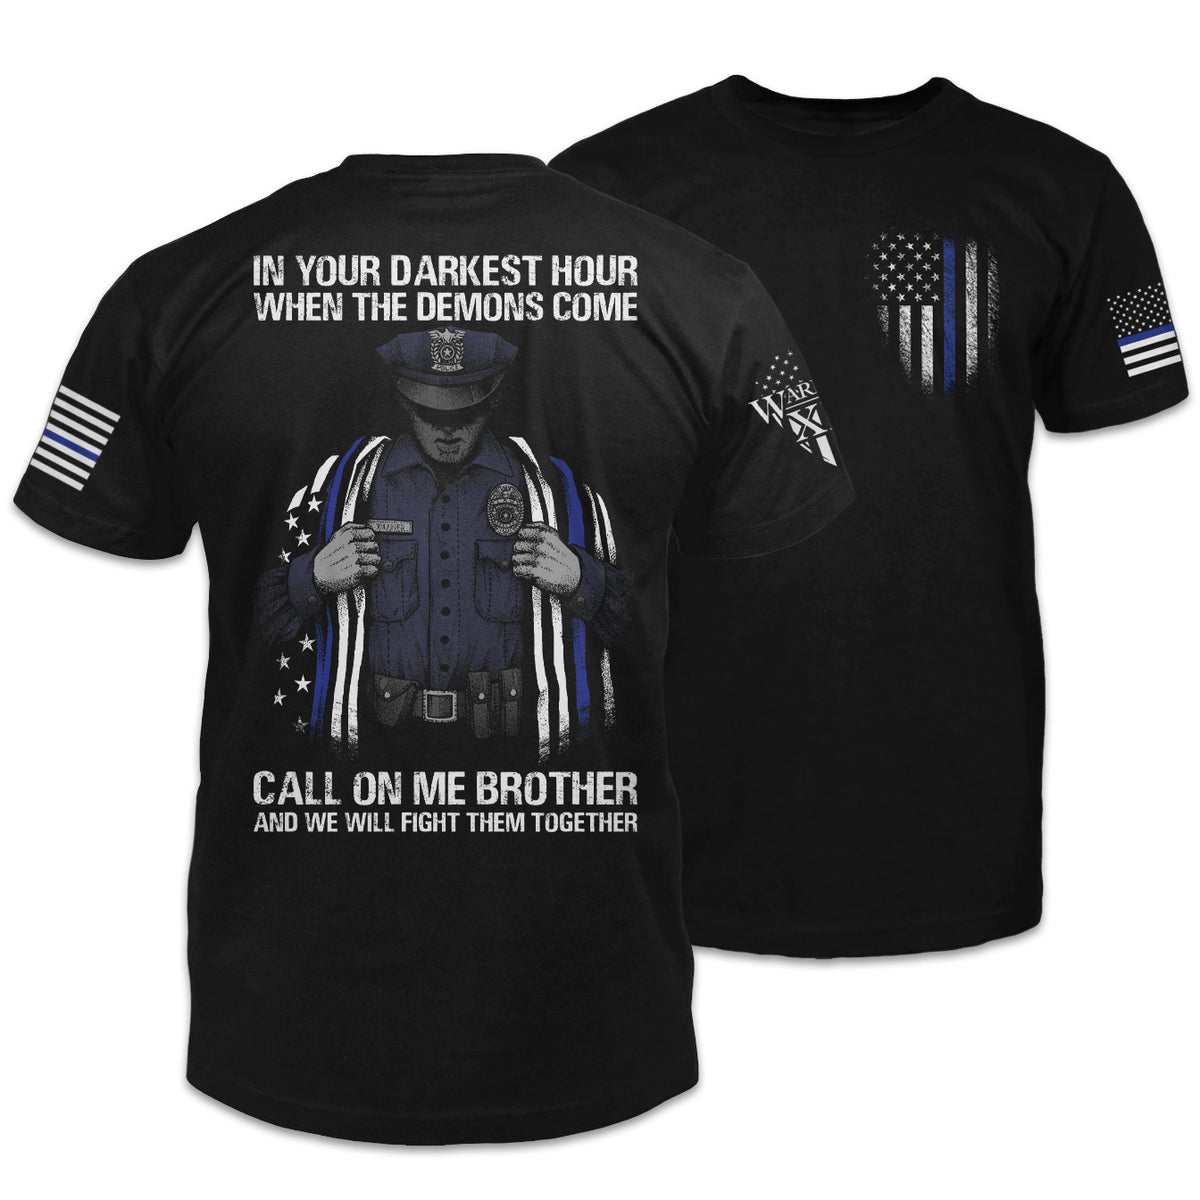 Front and back black t-shirt with the words "In your darkest hour when the demons come, call on me, brother, and we will fight them together" with a police officer holding a flag printed on the shirt.